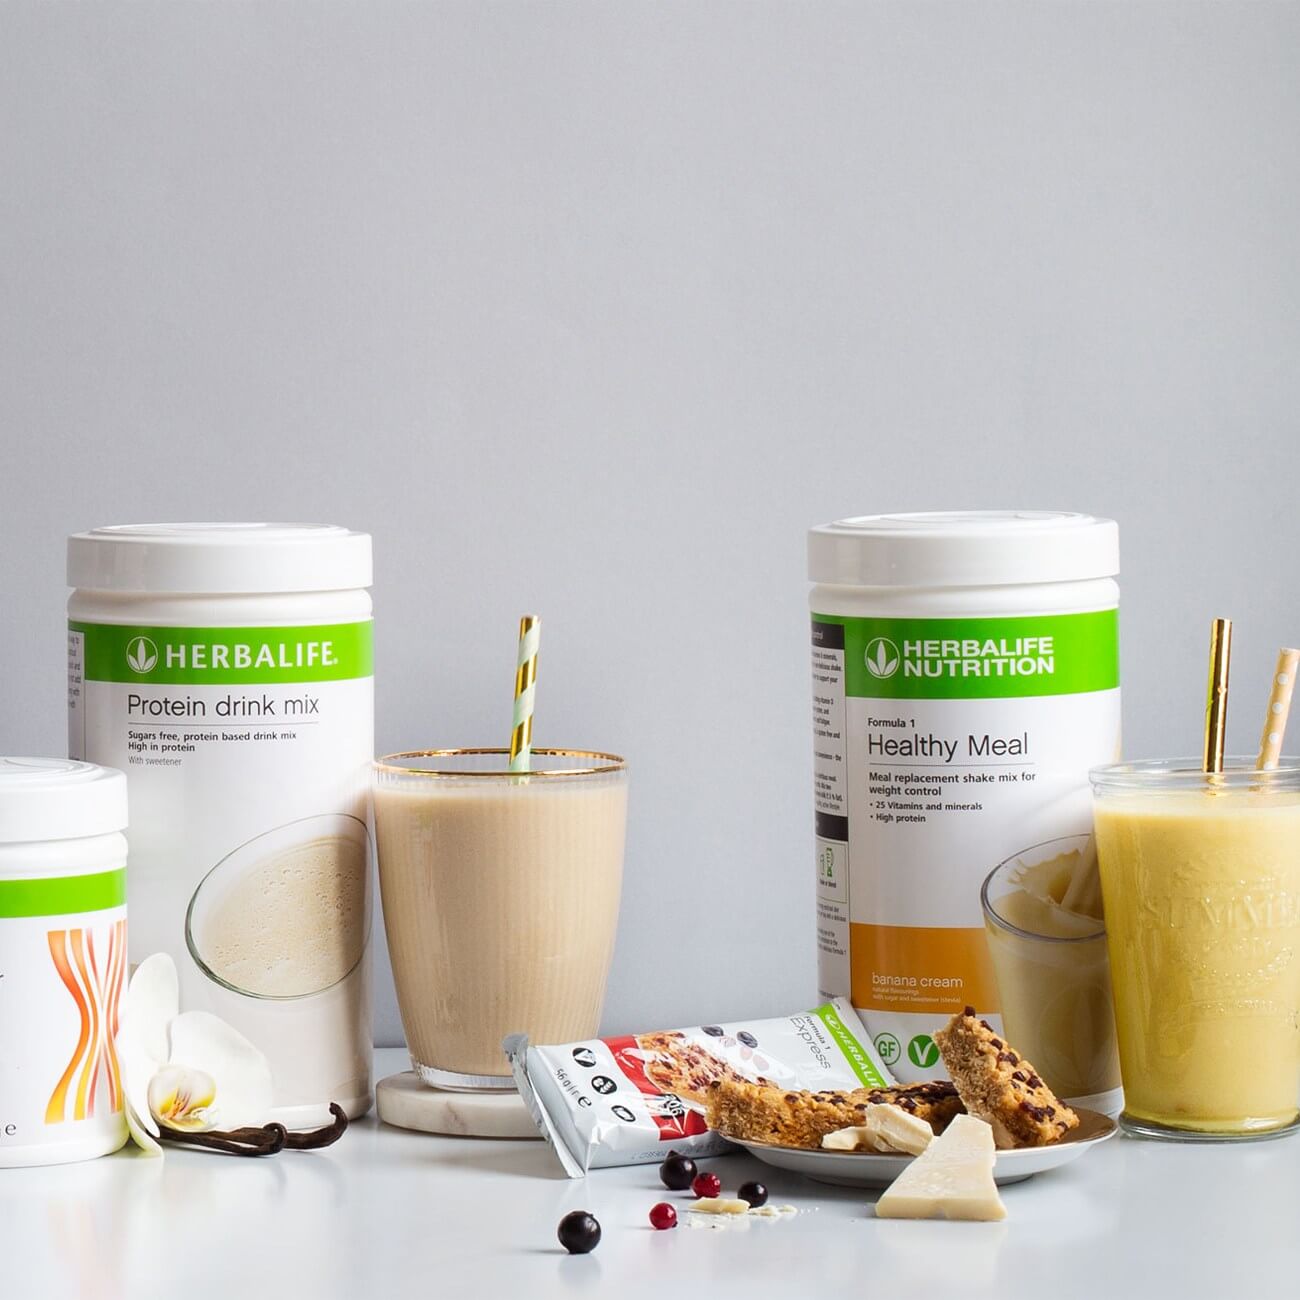 HERBALIFE FORMULA 1 SHAKE AND PROTEIN DRINK MIX FROM US